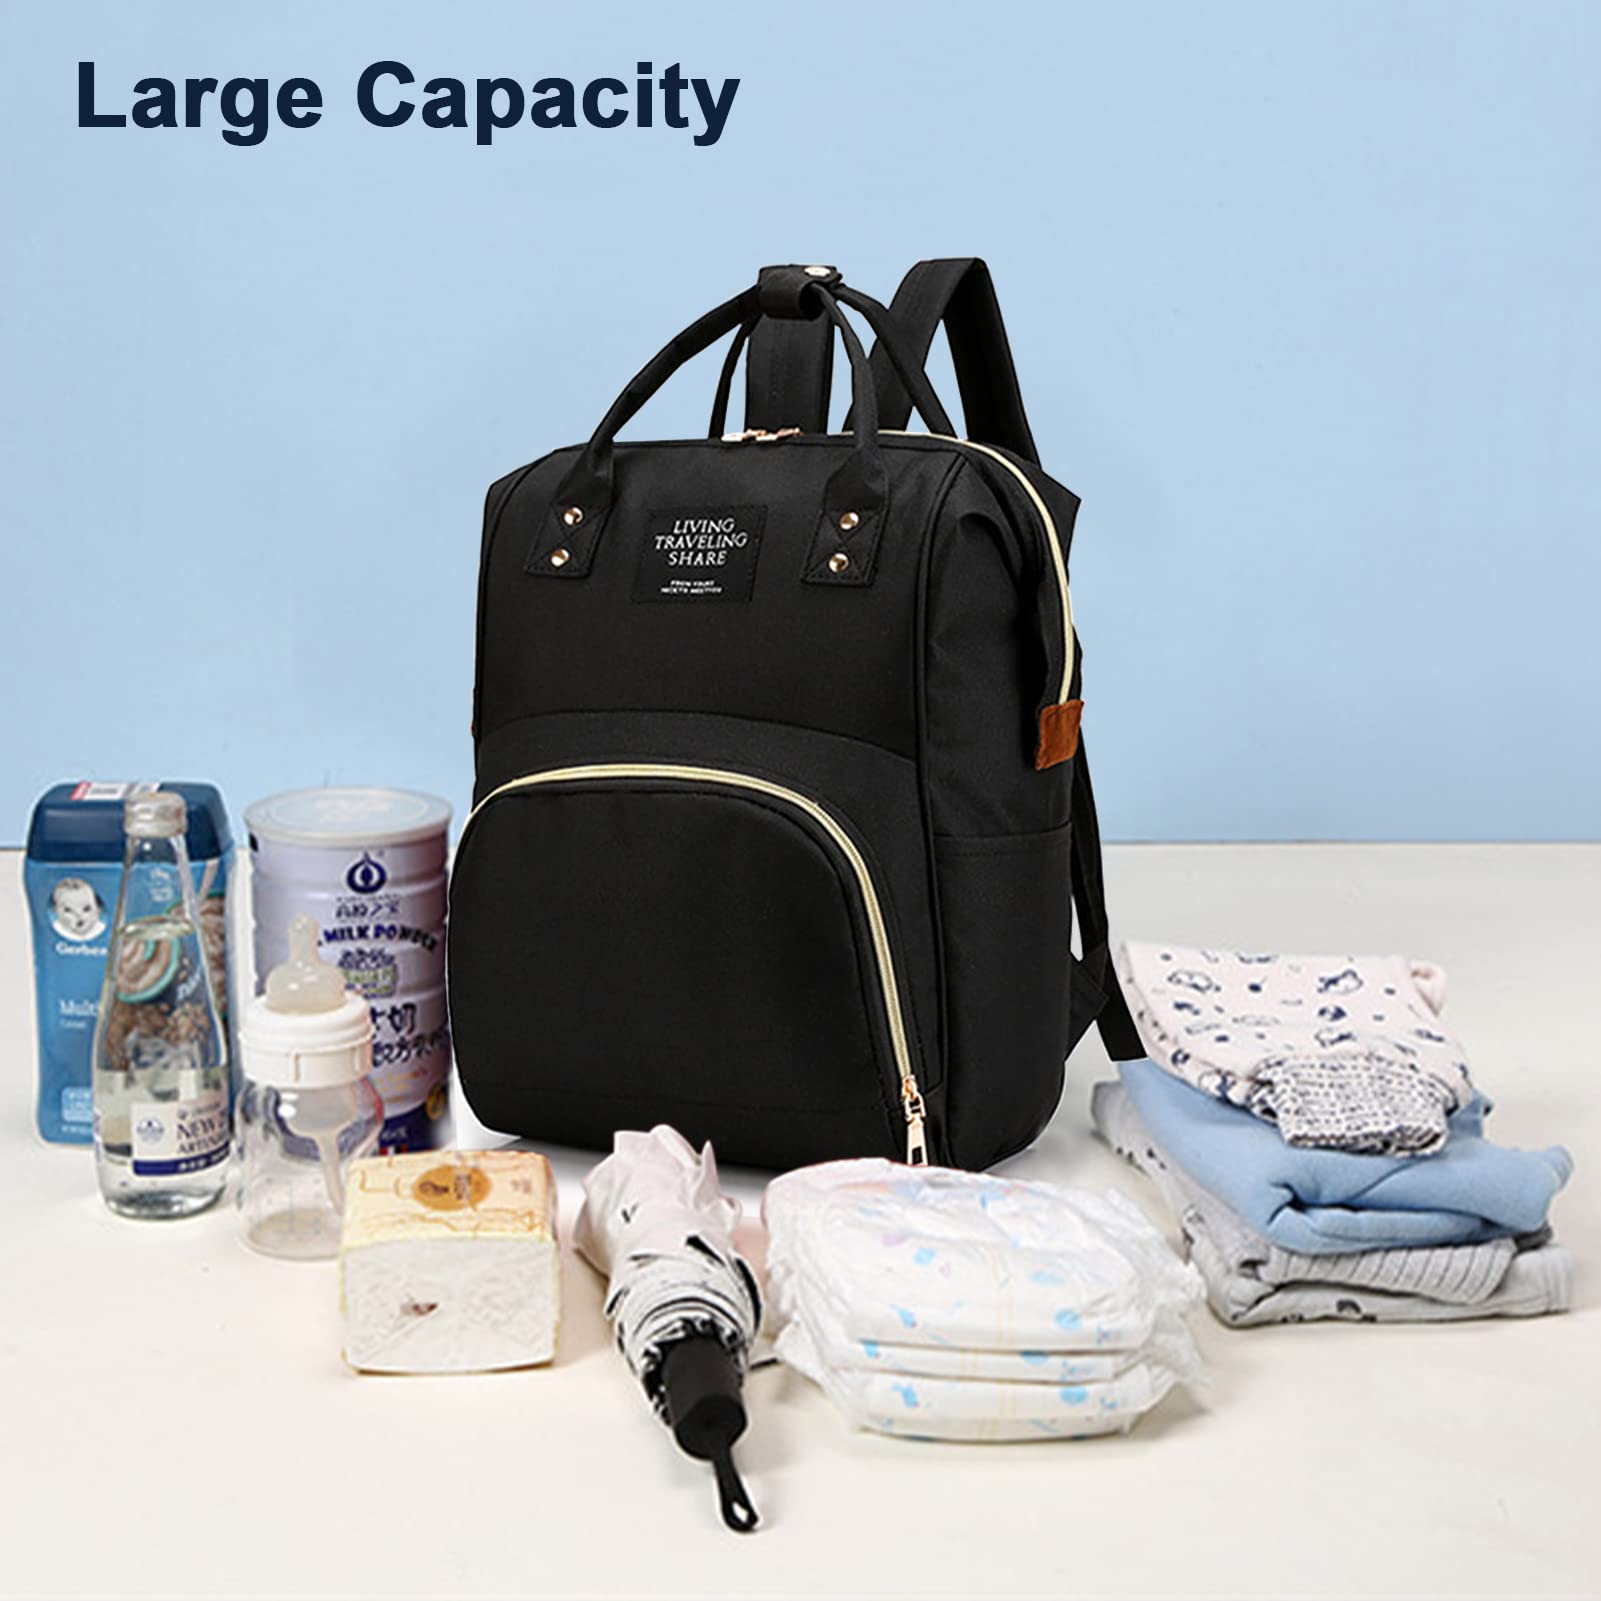 Diaper Bag with Organizing Pouches, Nappy Bags Handbag Multifunction Diaper Bag for Baby Care Travel Backpack Large Capacity Black